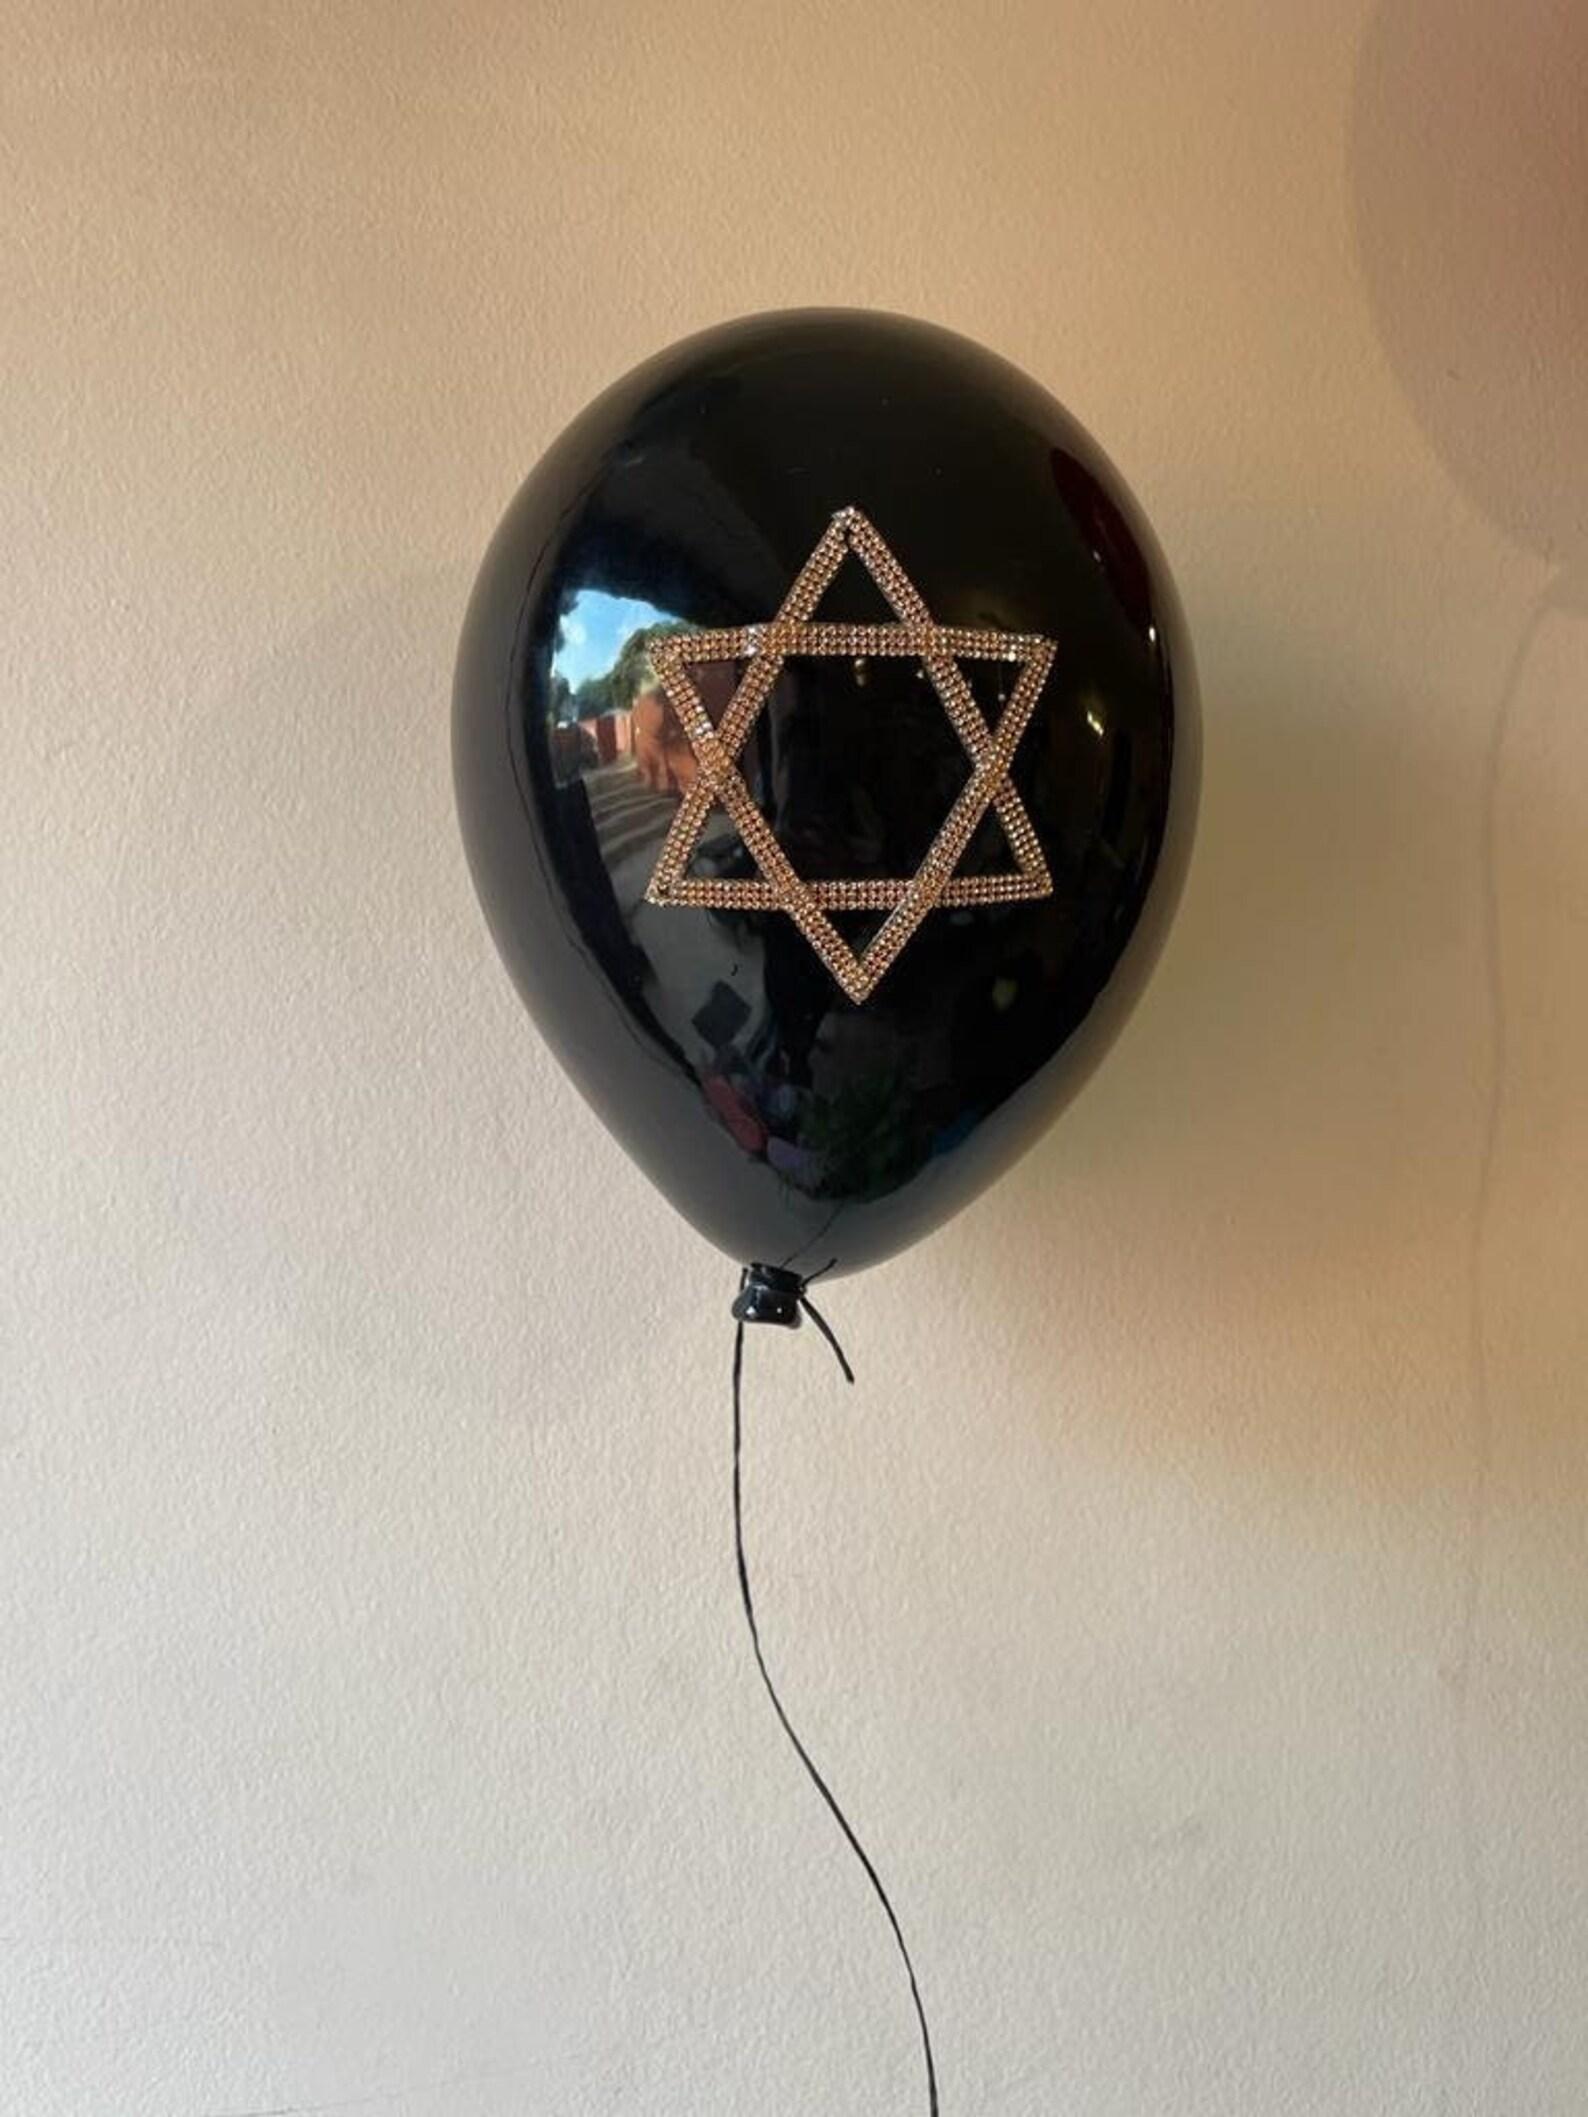 Swarovski Magen David Ceramic Balloon, sculpture handmade for wall, ceiling - Contemporary Sculpture by Reli Smith and Osnat Yaffe Zimmerman